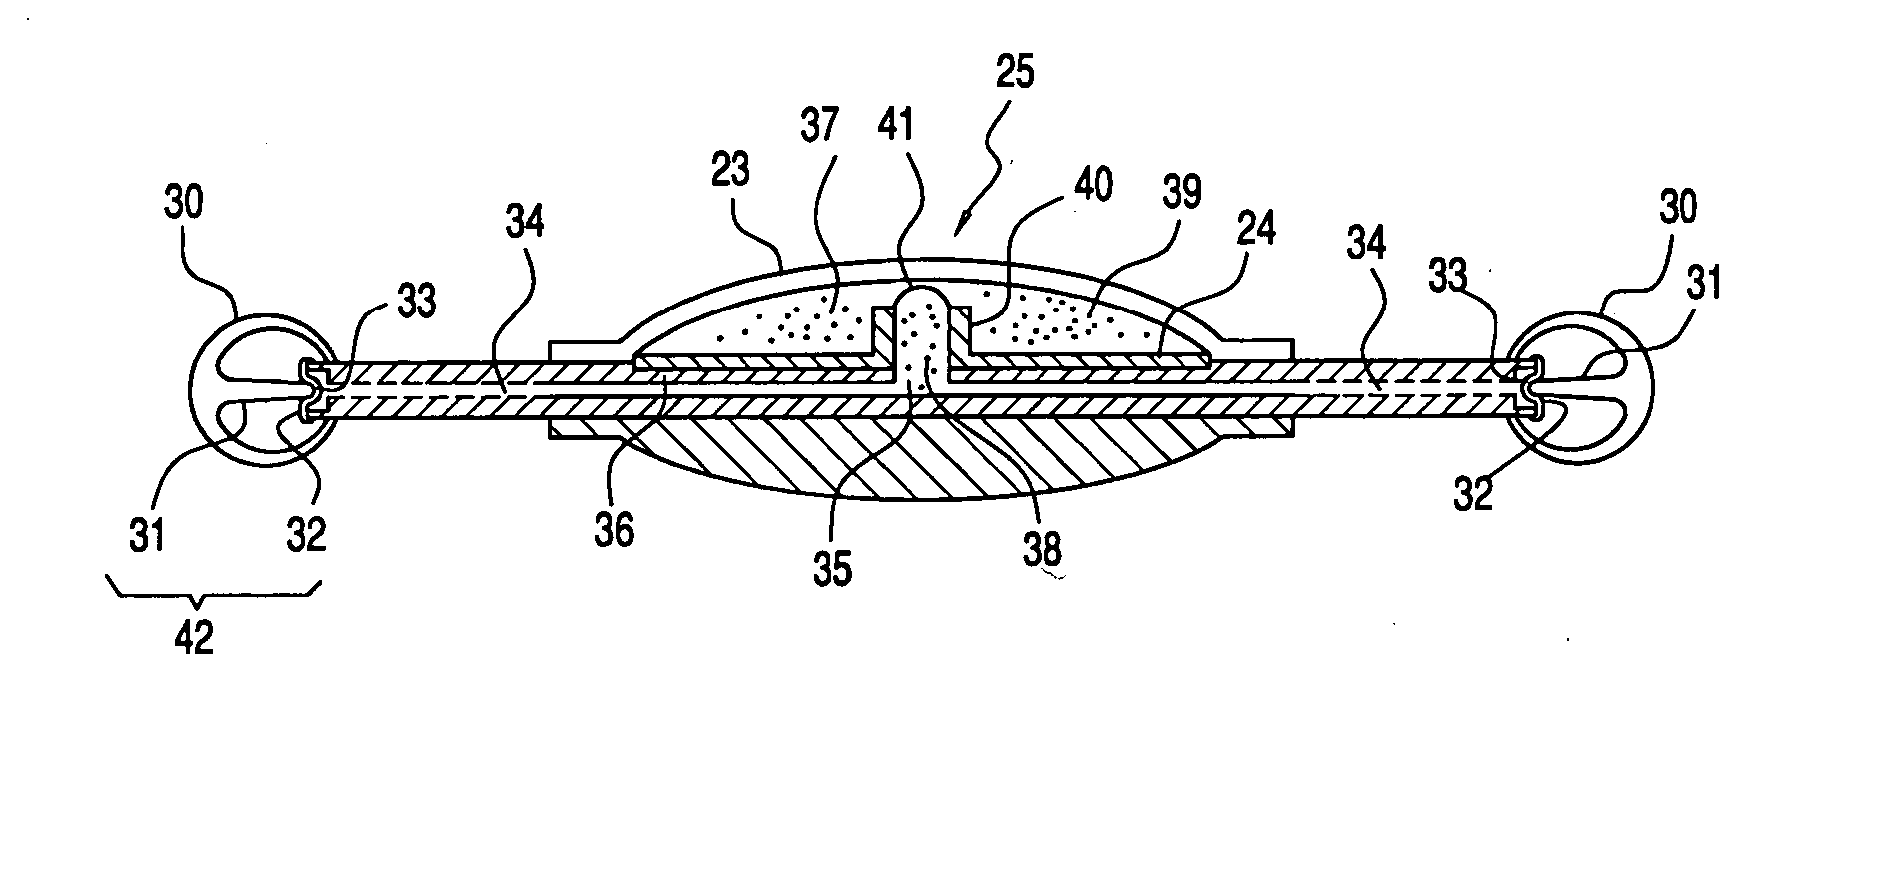 Accommodating intraocular lens system utilizing direct force transfer from zonules and method of use